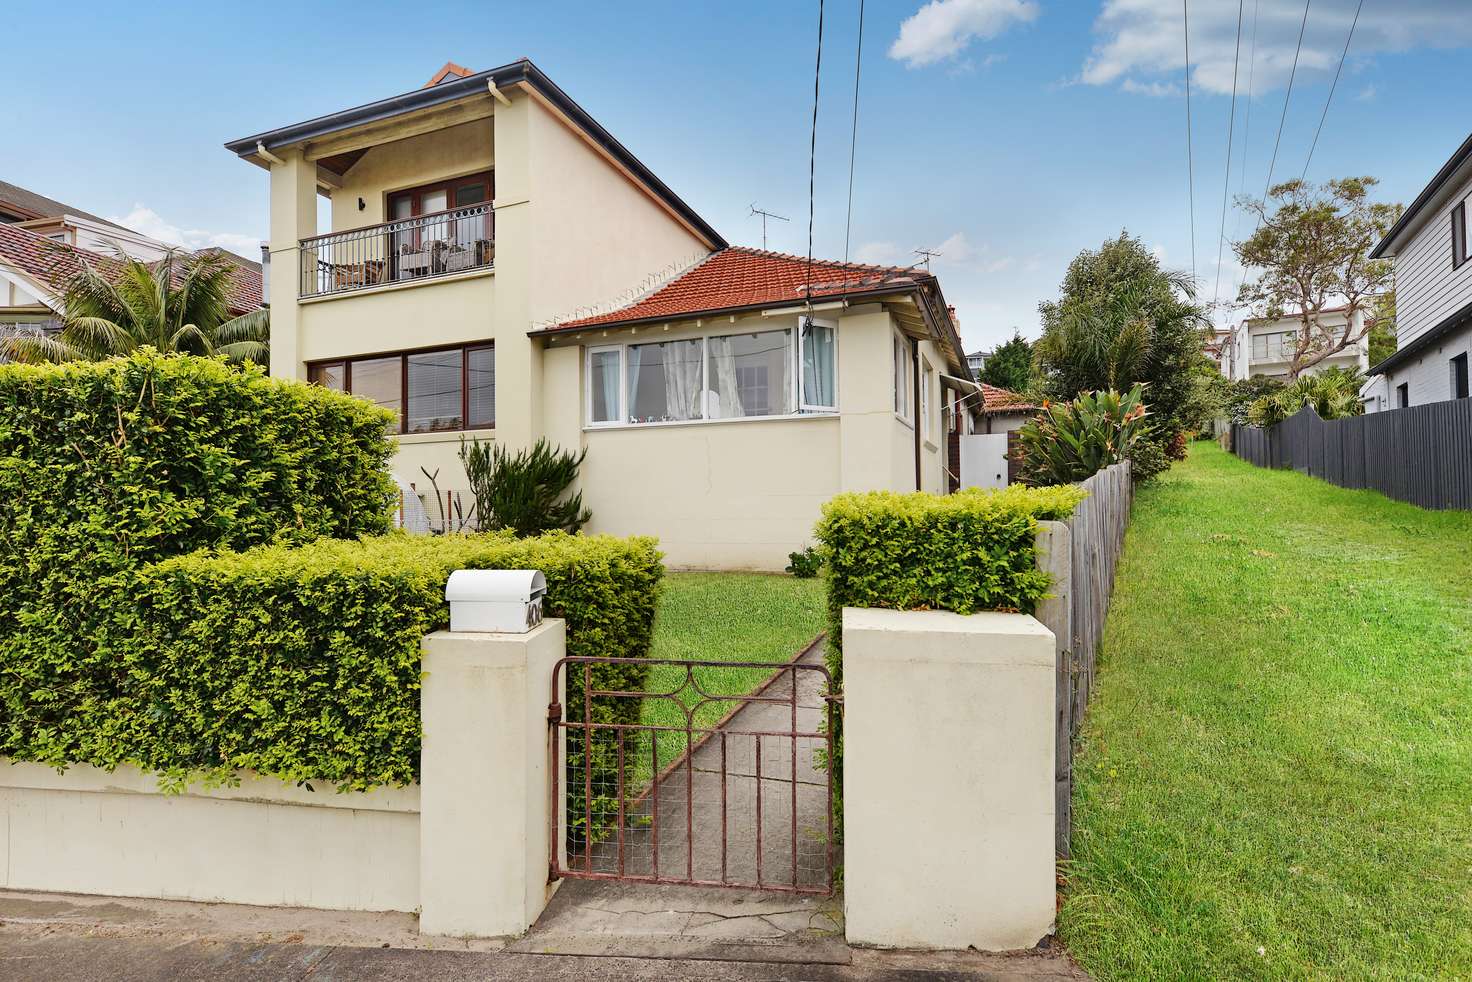 Main view of Homely house listing, 406 Malabar Rd, Maroubra NSW 2035